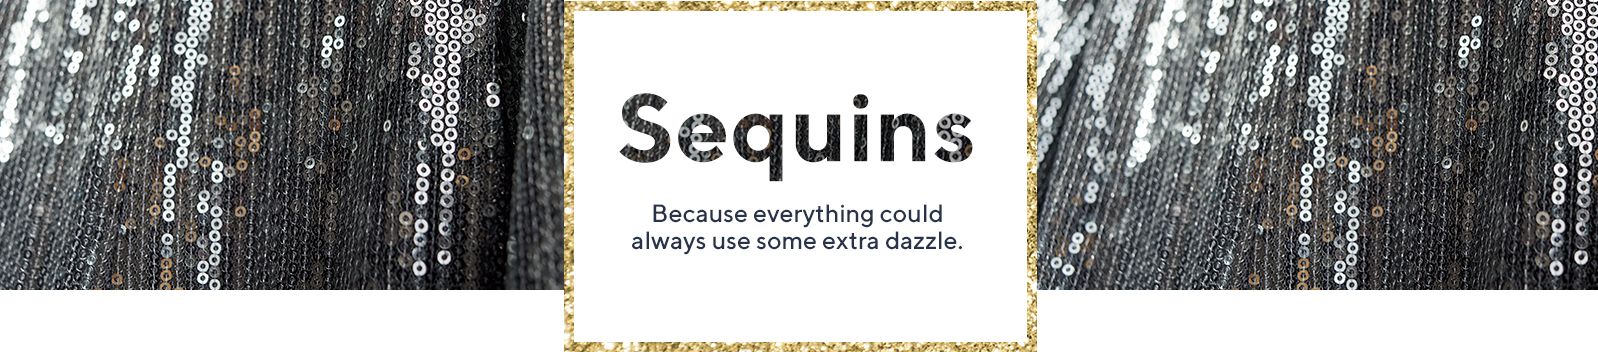 Sequins - Because everything could always use some extra dazzle.